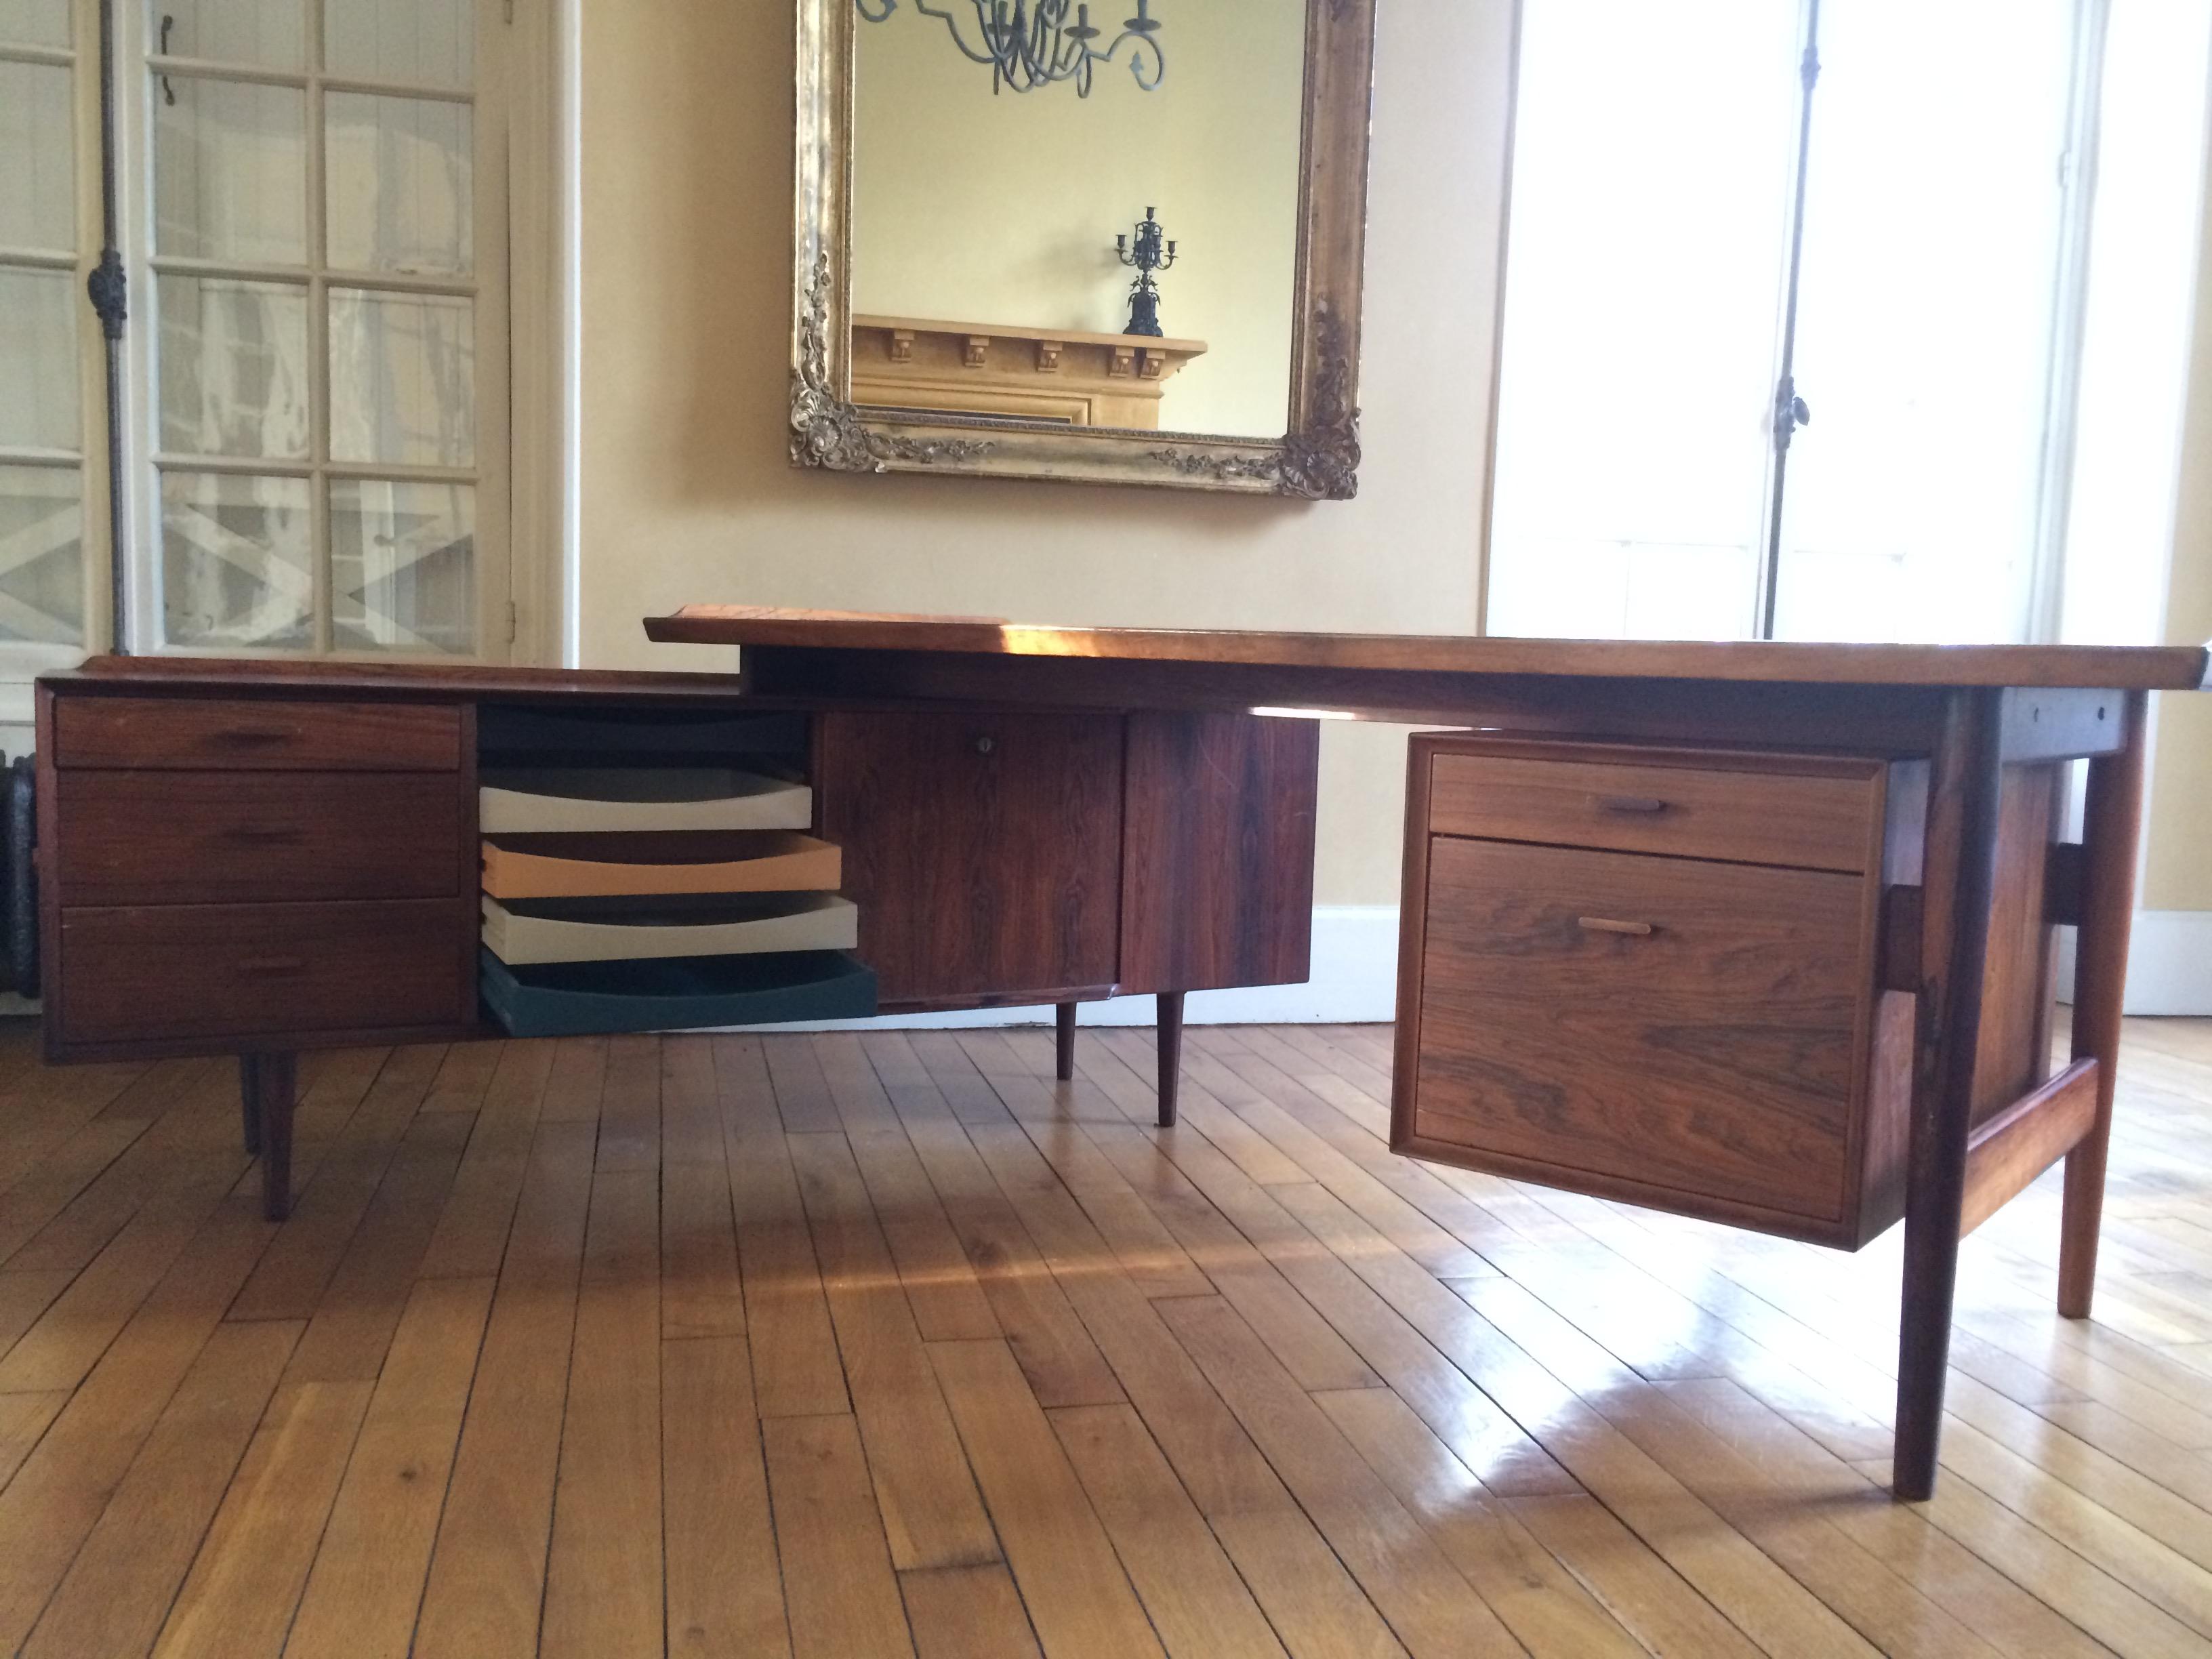 Arne Vodder 1950s desk composed of a sideboard and a tray with exotic wood drawer.
Arne Vodder was a leading light of what might be called the “second generation” of forward-thinking 20th century Danish furniture designers — those who, following in